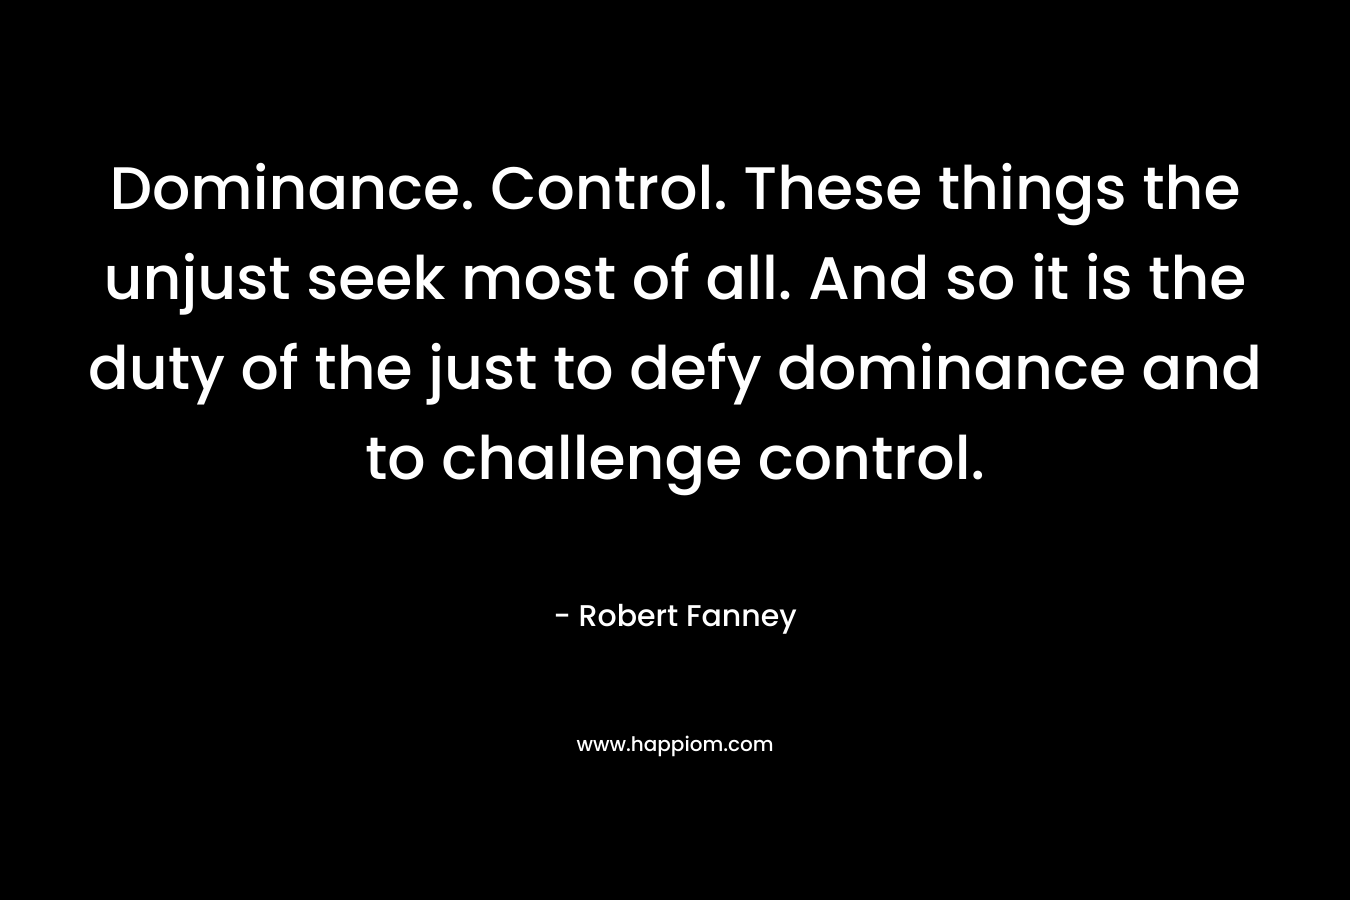 Dominance. Control. These things the unjust seek most of all. And so it is the duty of the just to defy dominance and to challenge control. – Robert Fanney